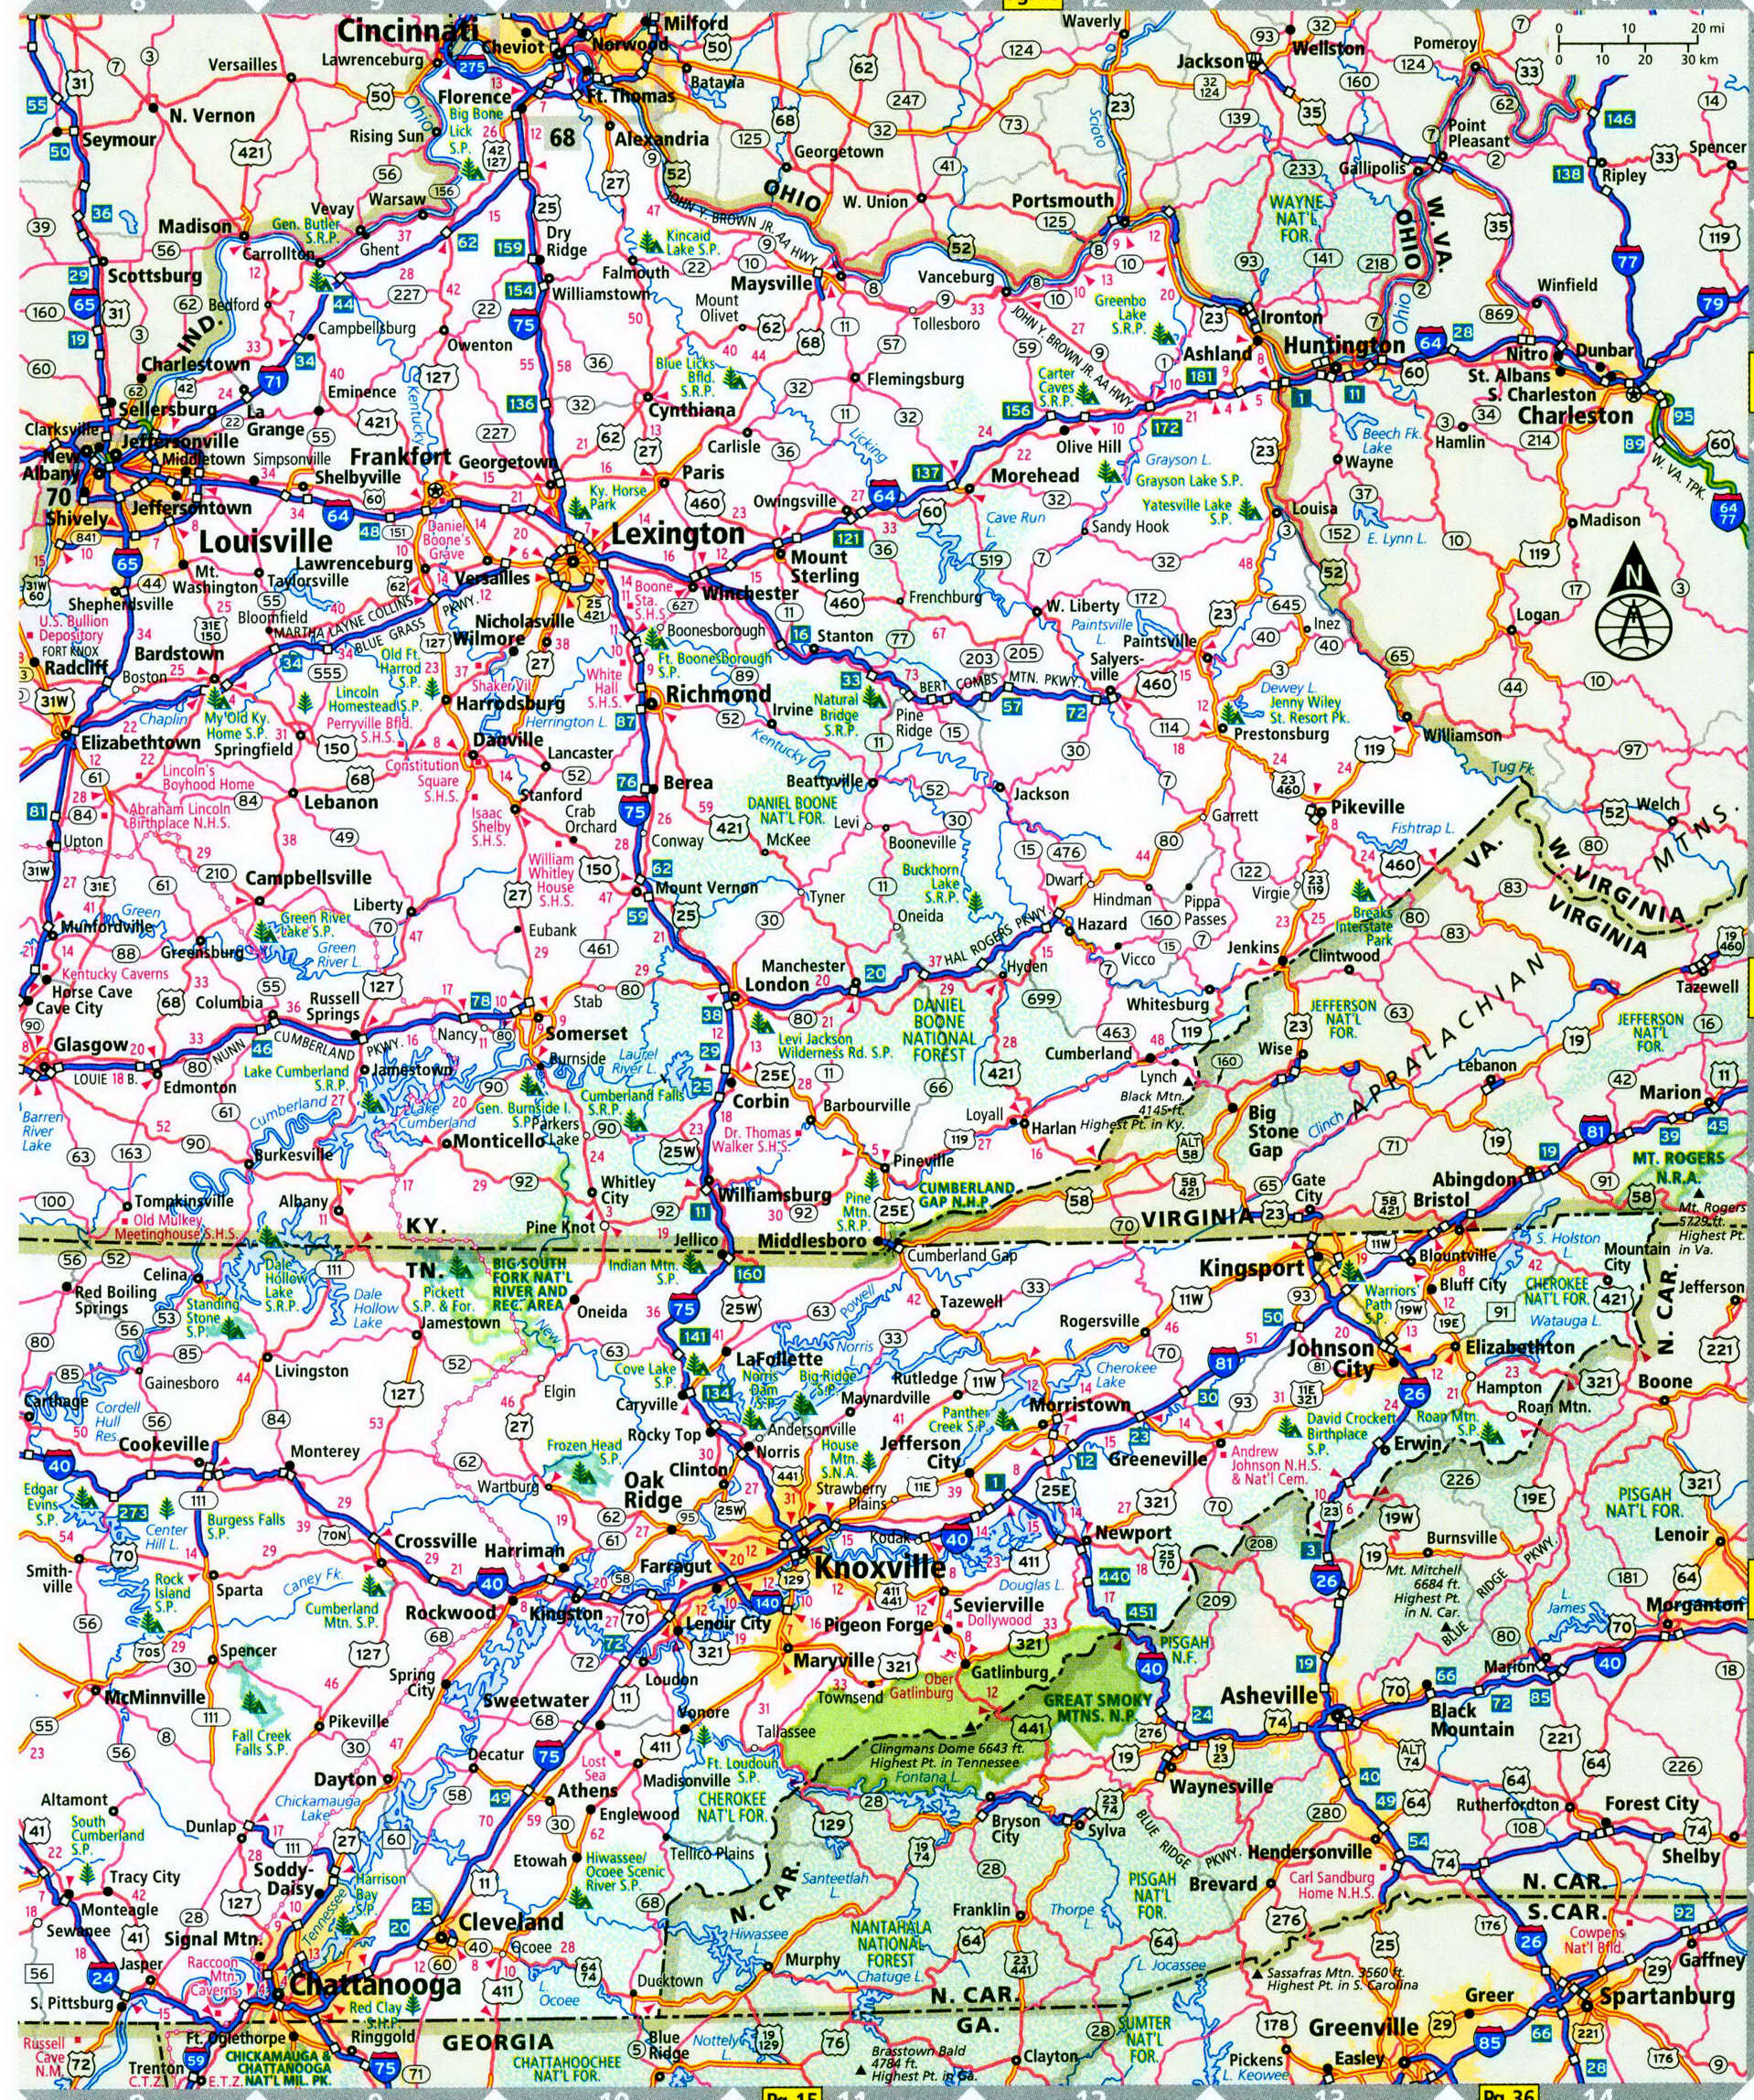 Kentuky and Tennessee interstate highways map free